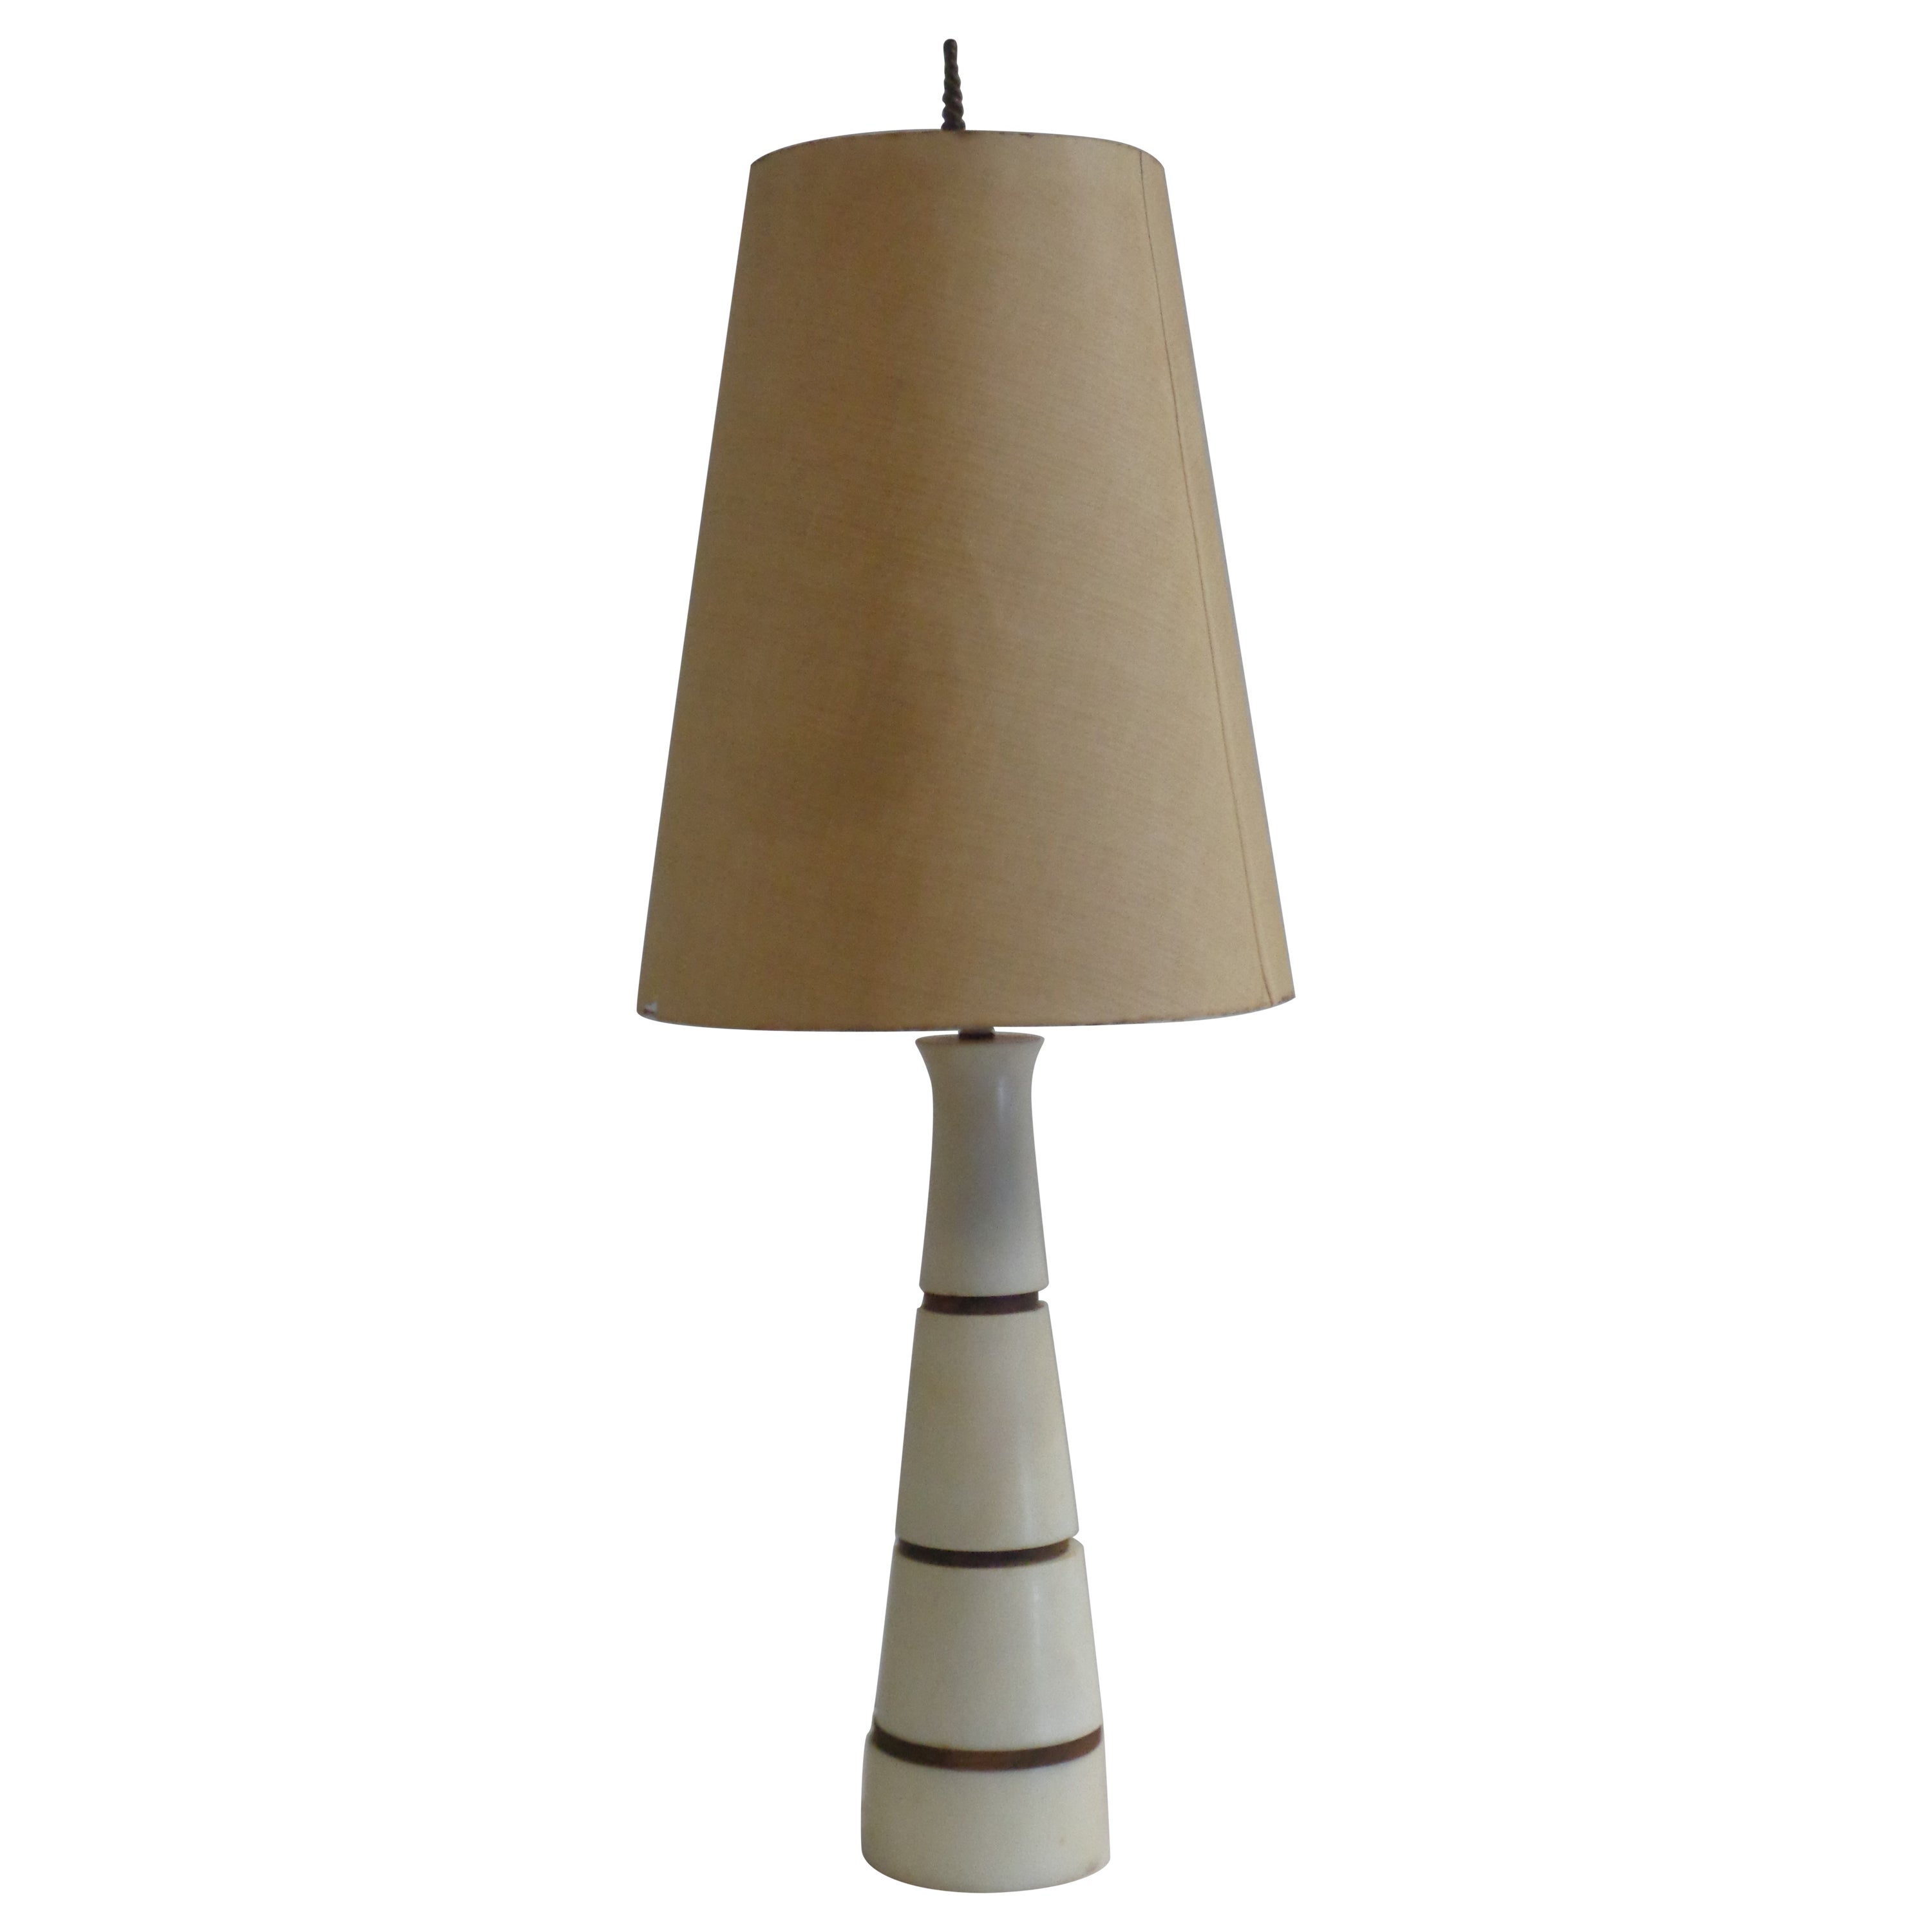  Italian Modernist Conical Form Alabaster and Walnut Table Lamp, 1940's For Sale